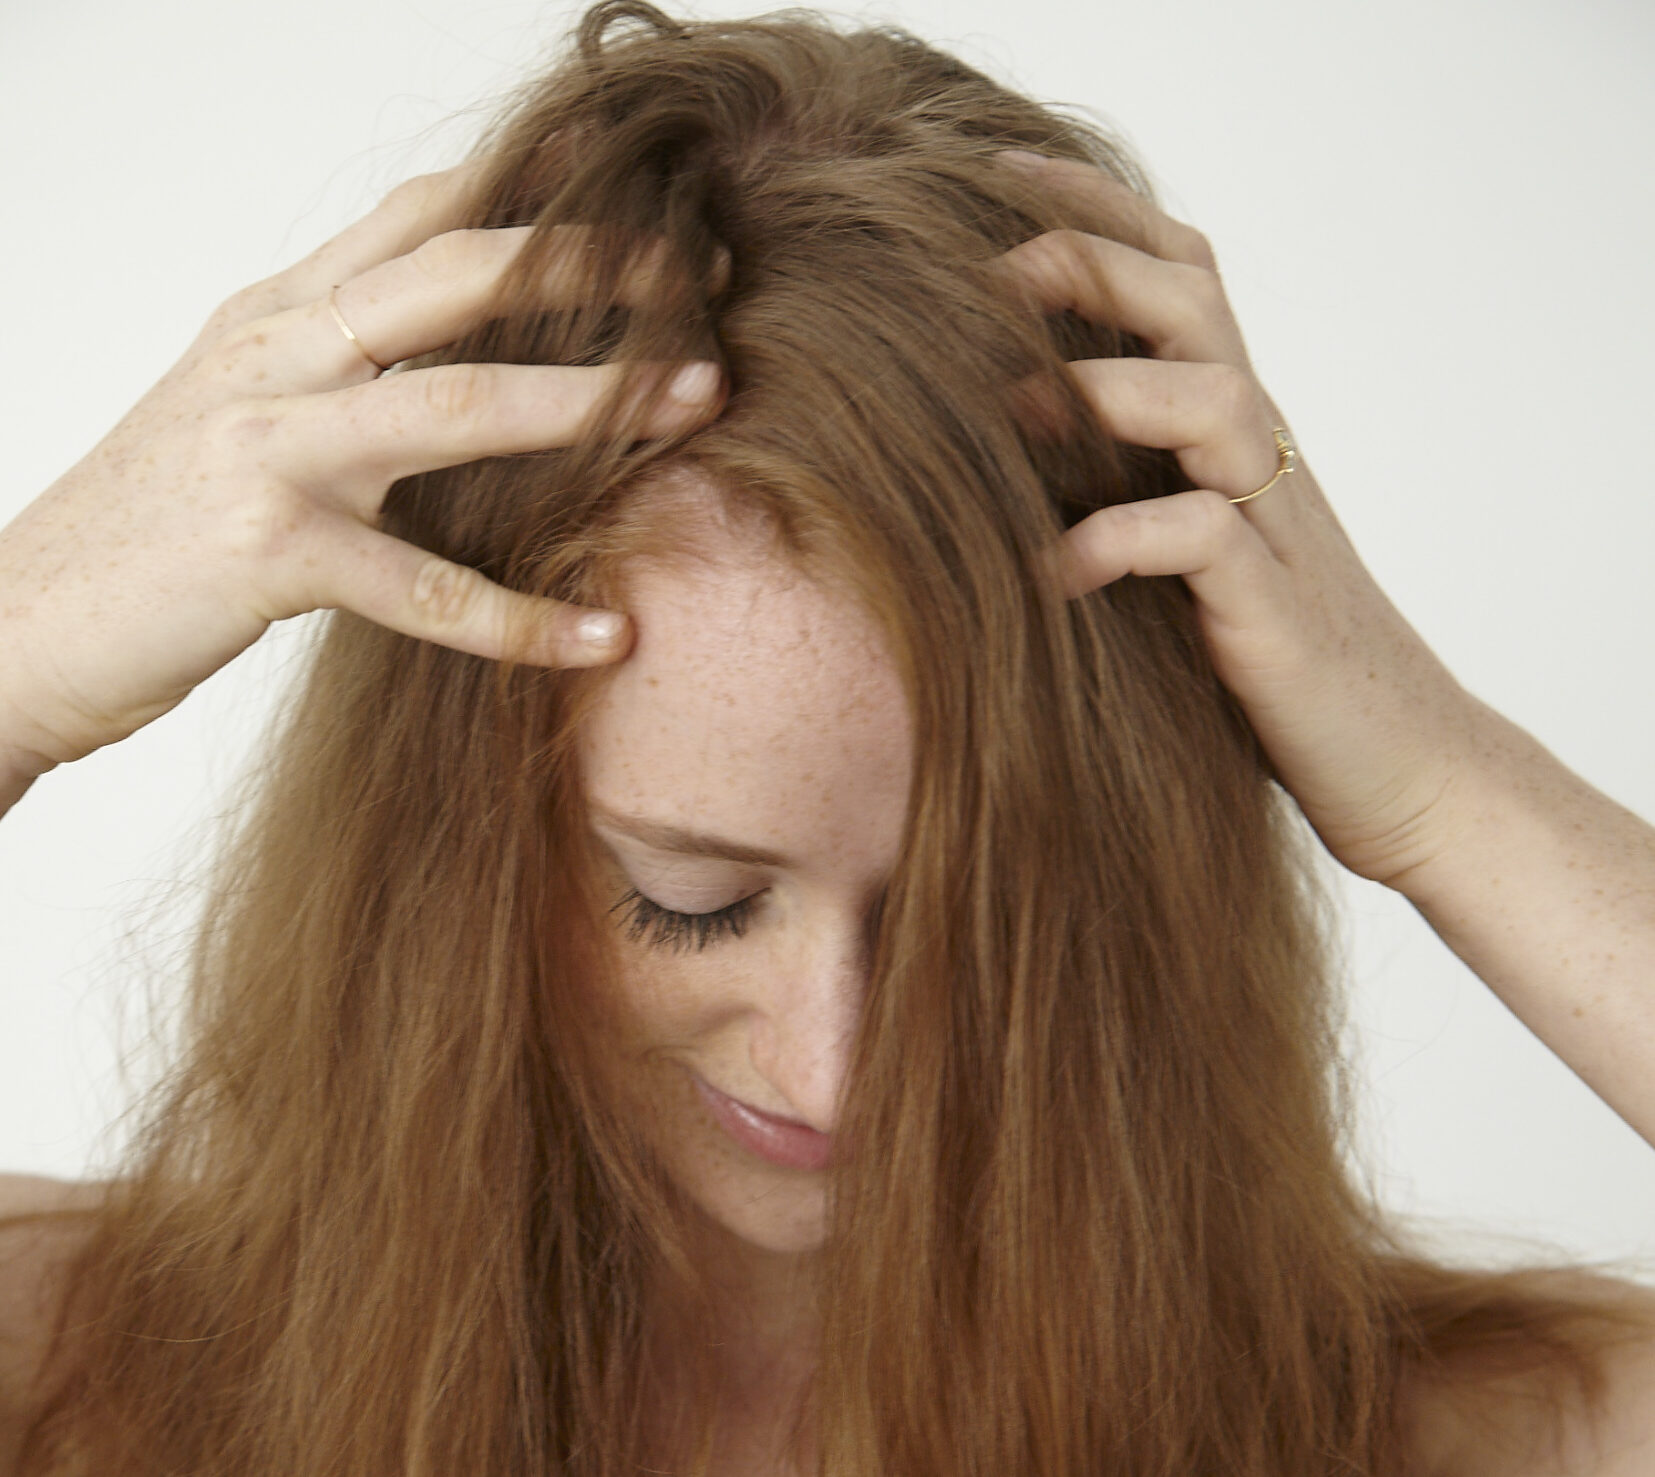 How Redheads Can Correctly Clean Scalp Buildup 